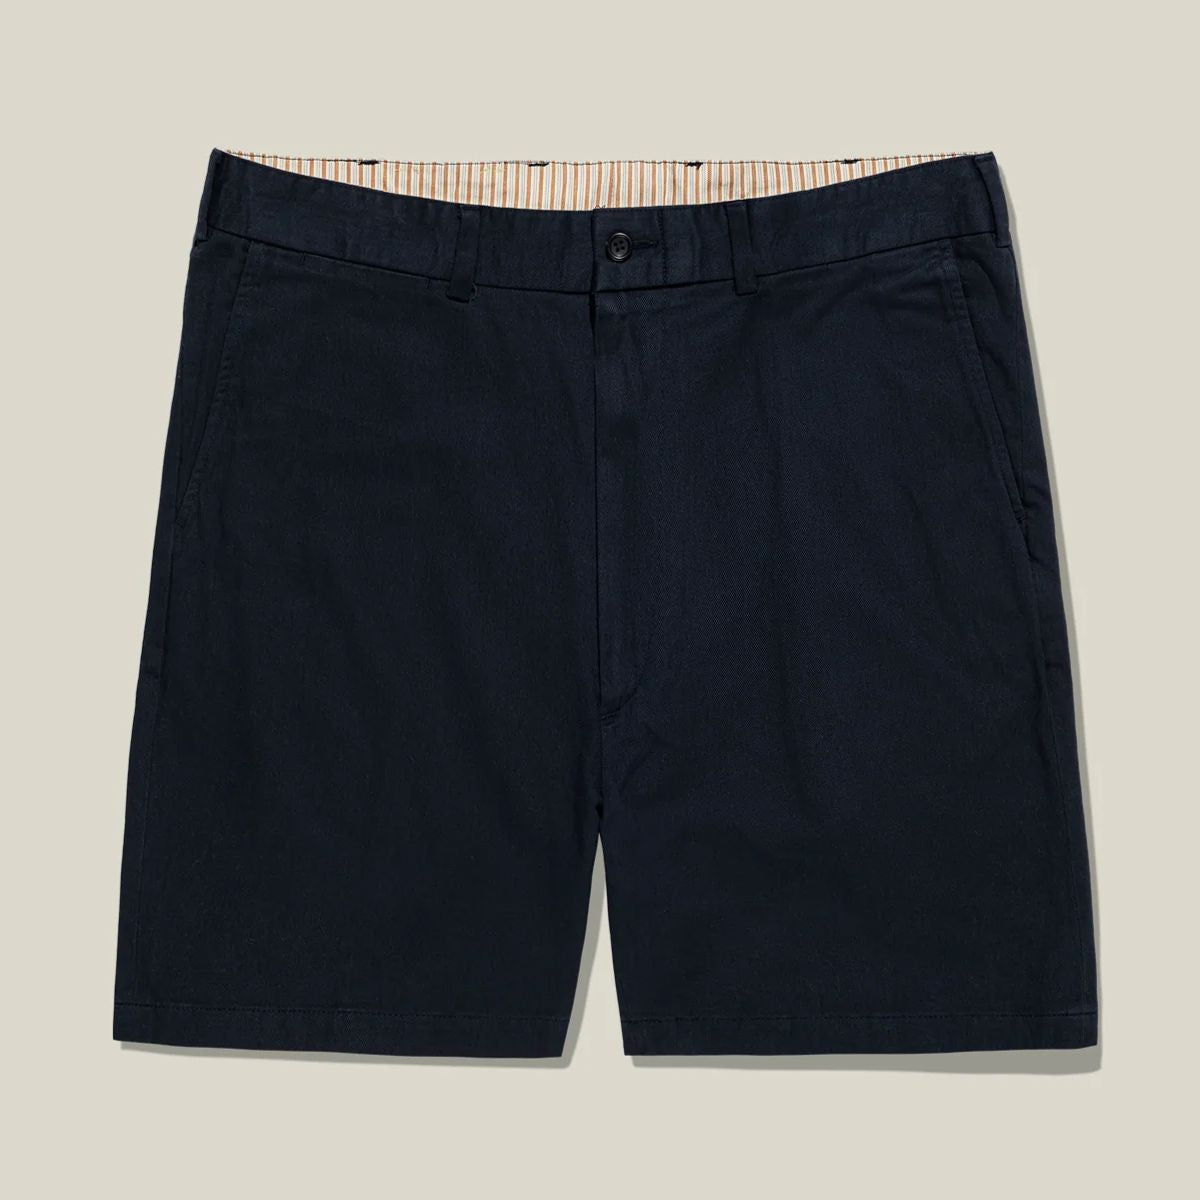 M3 Straight Fit Vintage Twill Shorts in Navy by Bills Khakis